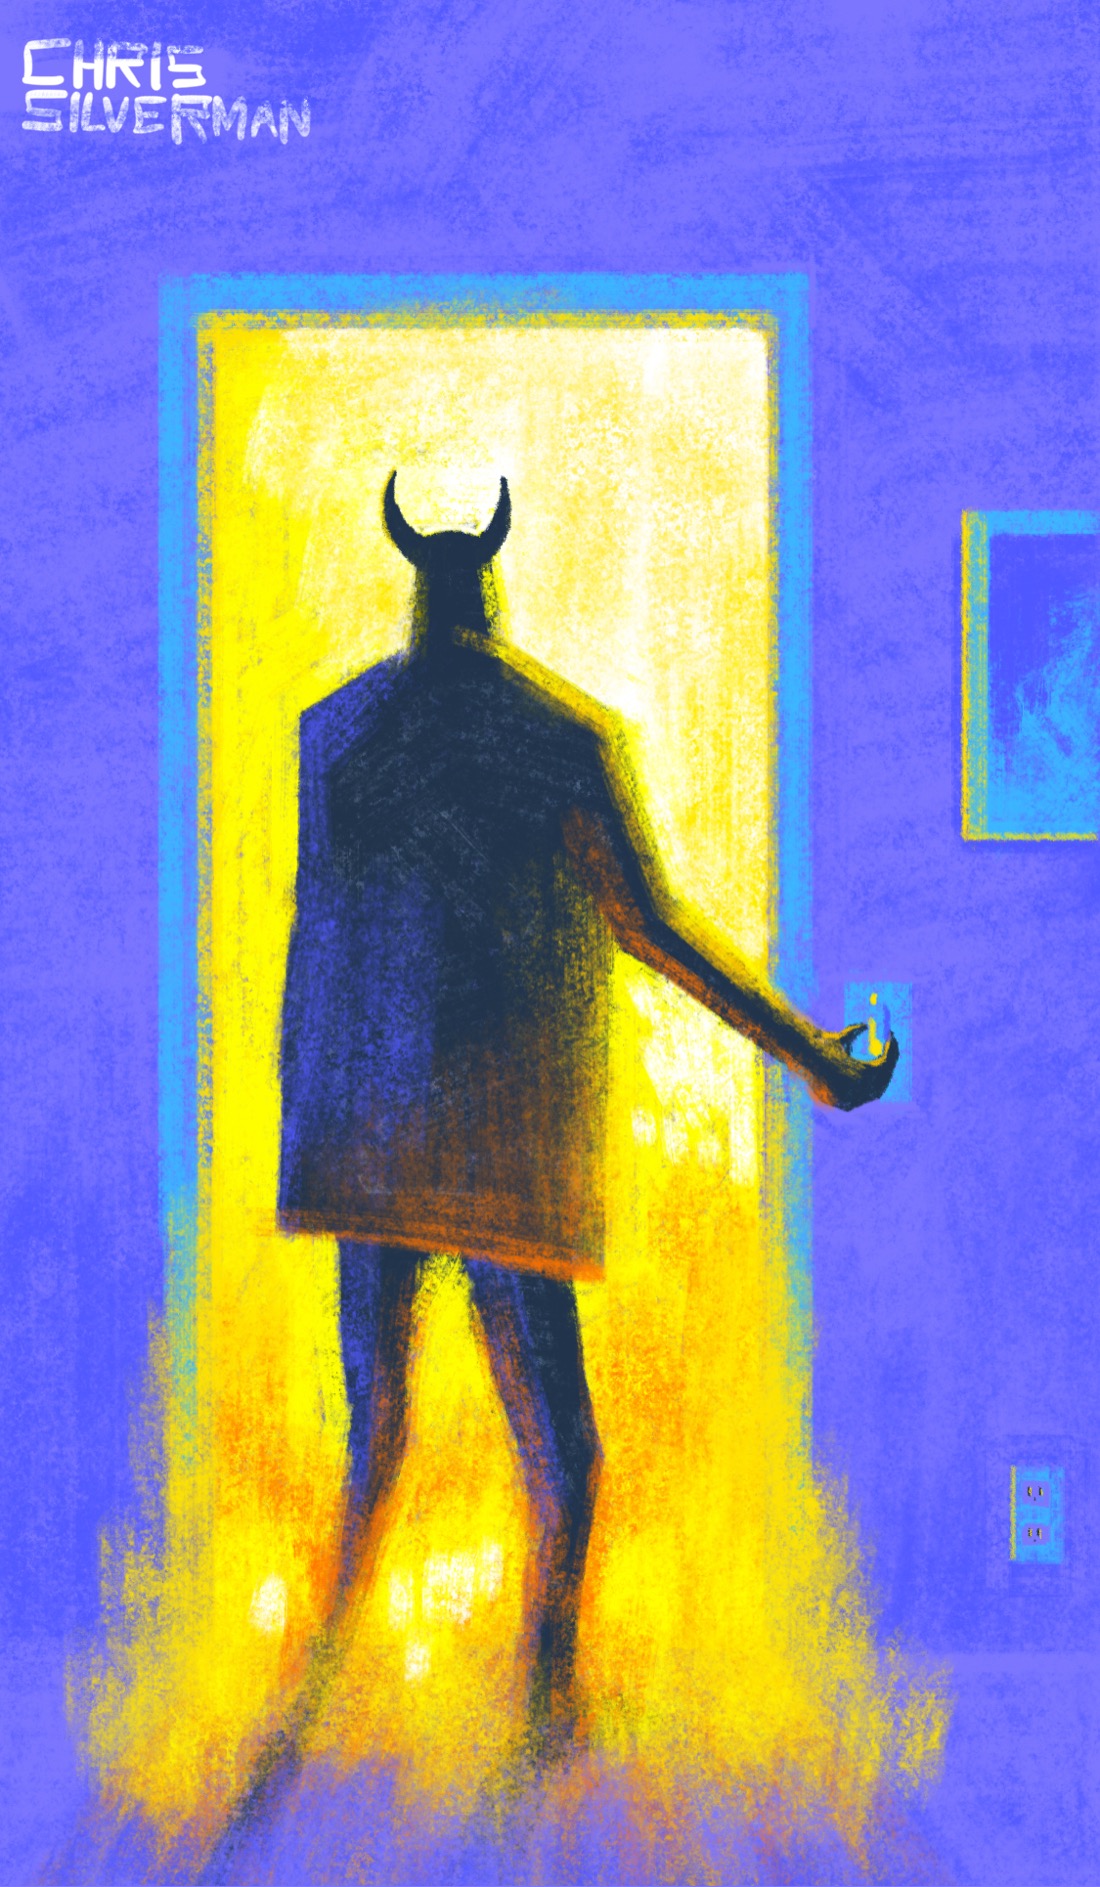 A room, darkened. The walls and floor are the blue color of a normally white room that's mostly dark. There's one light source, though: the large door in the center of the room, in which a tall demonic figure with horns is standing. The figure looks like it is wearing a leather jacket and has one hand on the lightswitch next to the door, as though it is walking into a closet and flicking the light on. In this case, the light is an inferno of yellow flames that spill out into the floor of the room. To the right of the flaming door is a small picture in a frame, the subject indeterminate, and an electrical outlet.